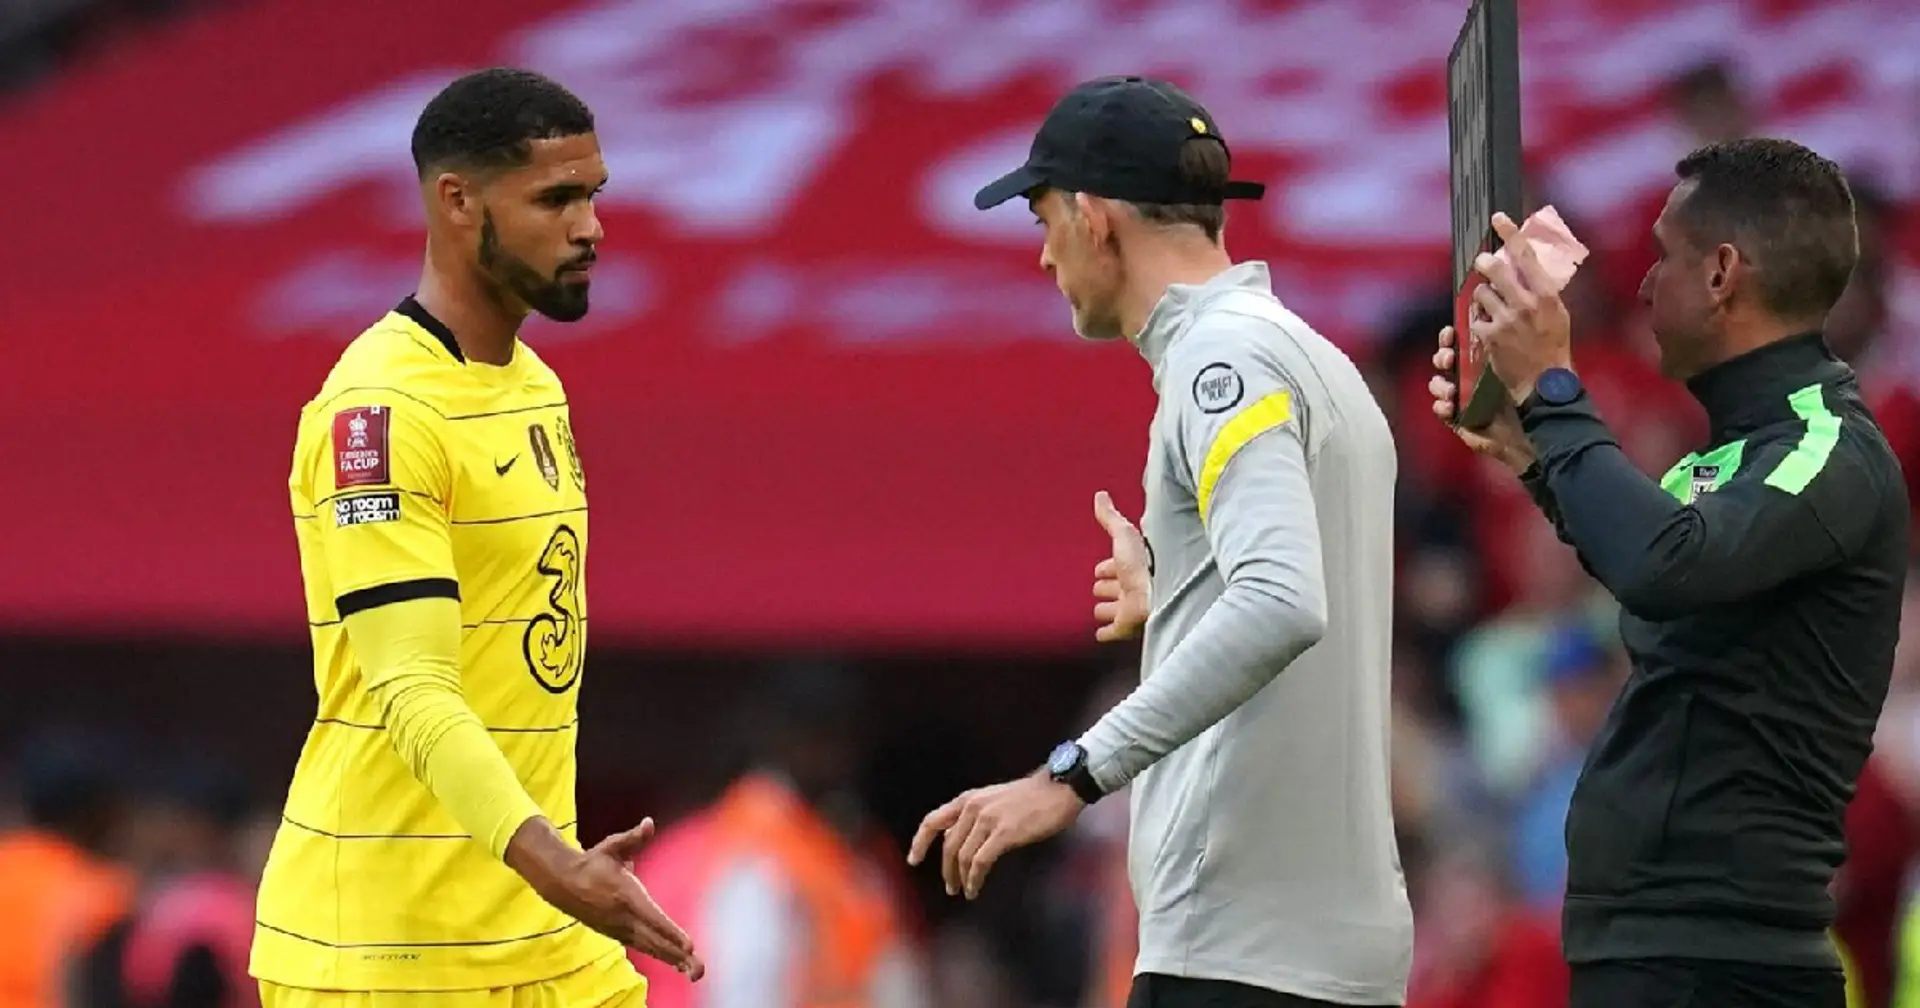 Tuchel explains why he subbed off Loftus-Cheek 15 minutes after he came on in FA Cup final